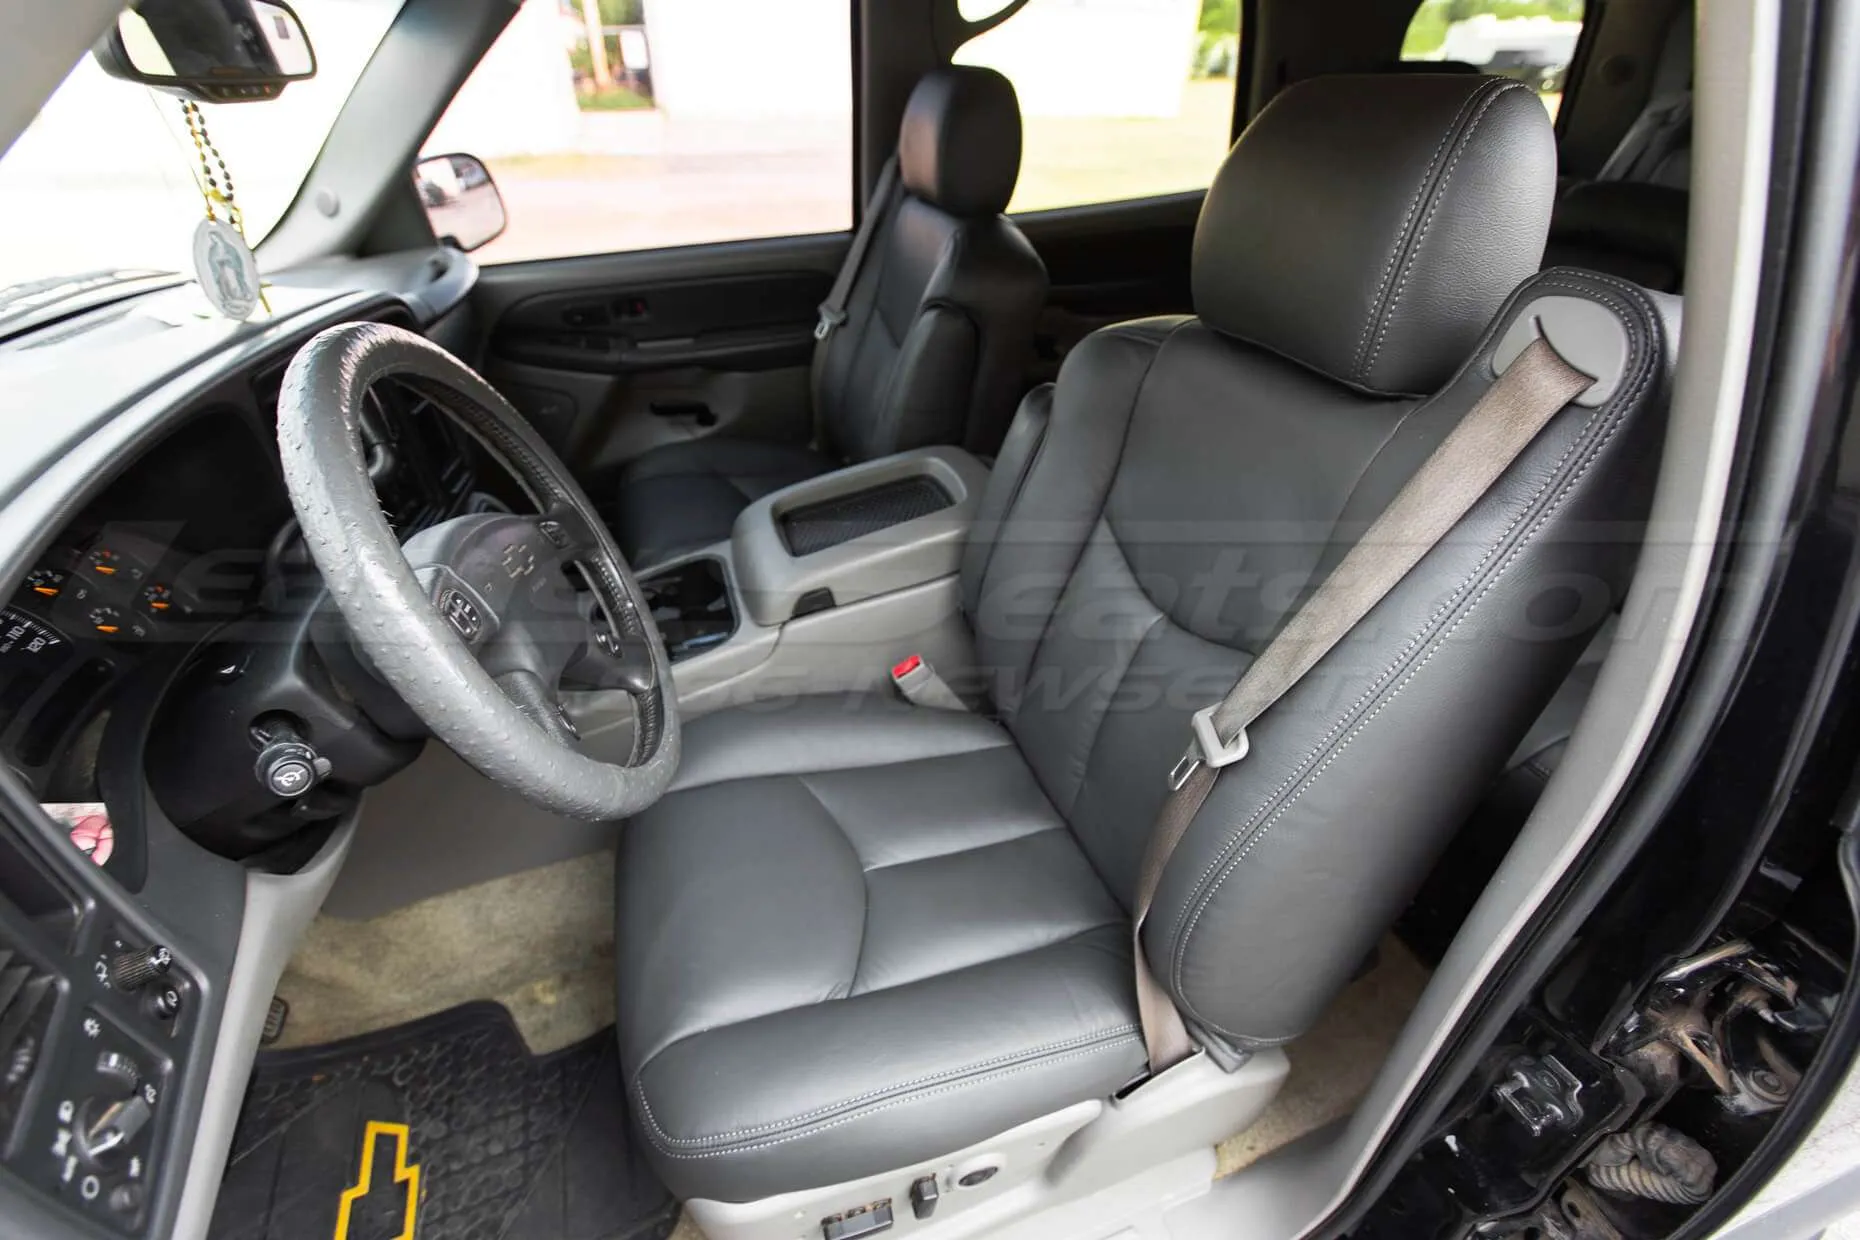 Chevy Tahoe with Graphite leahter seats - front driver side